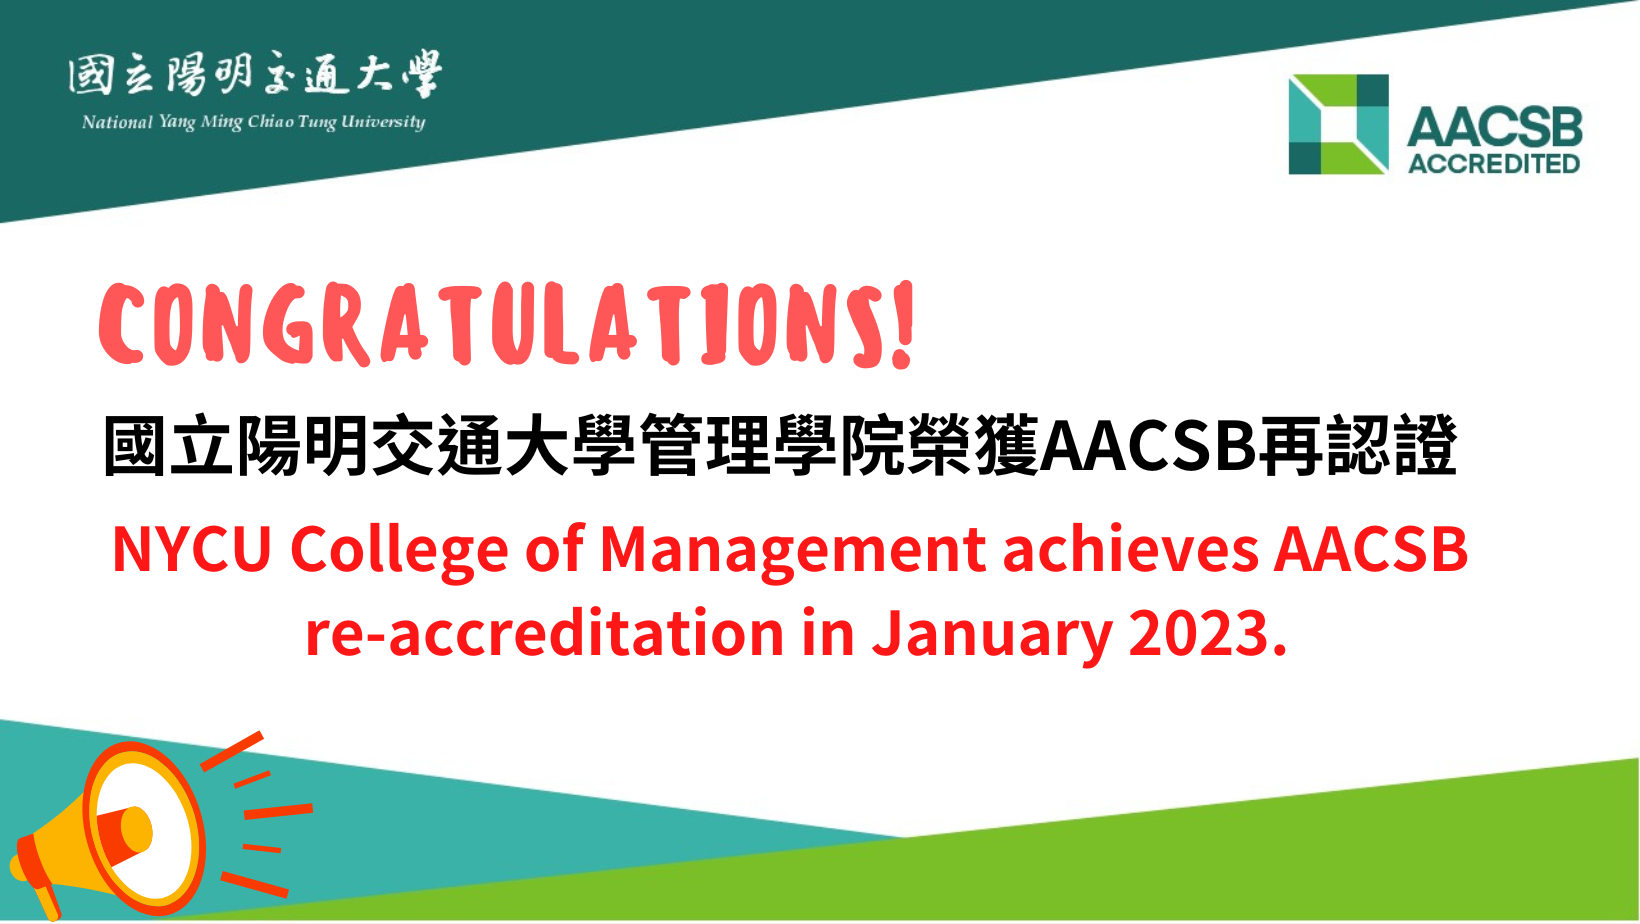 NYCU College of Management achieves AACSB re-accreditation in January 2023.